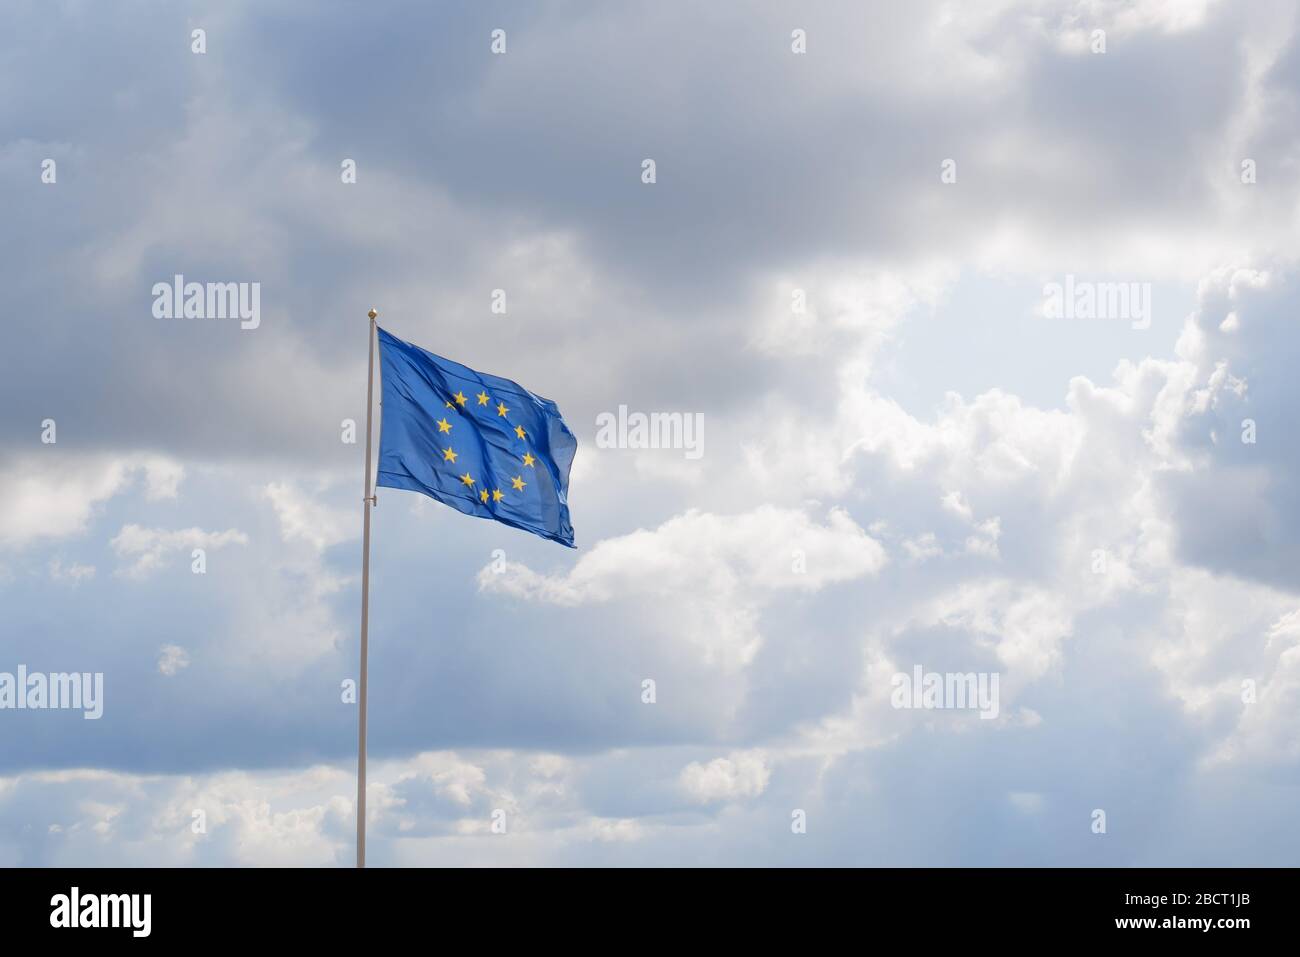 Official flag of European Union in the sky. Circle of yellow stars on blue background Stock Photo